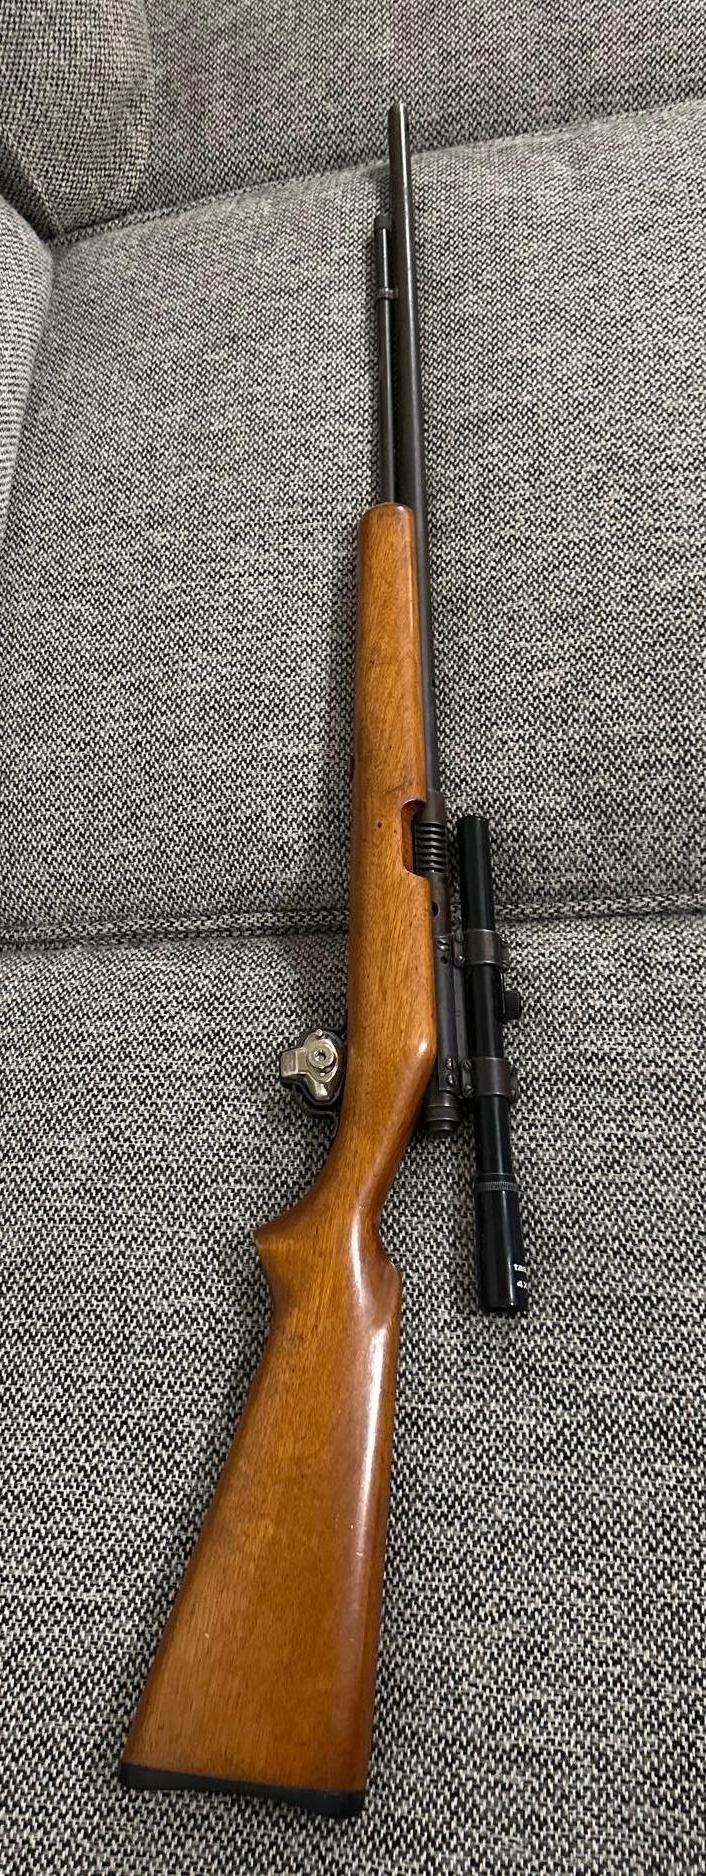 Springfield Model 87 LR 22 Cal with scope 4x15